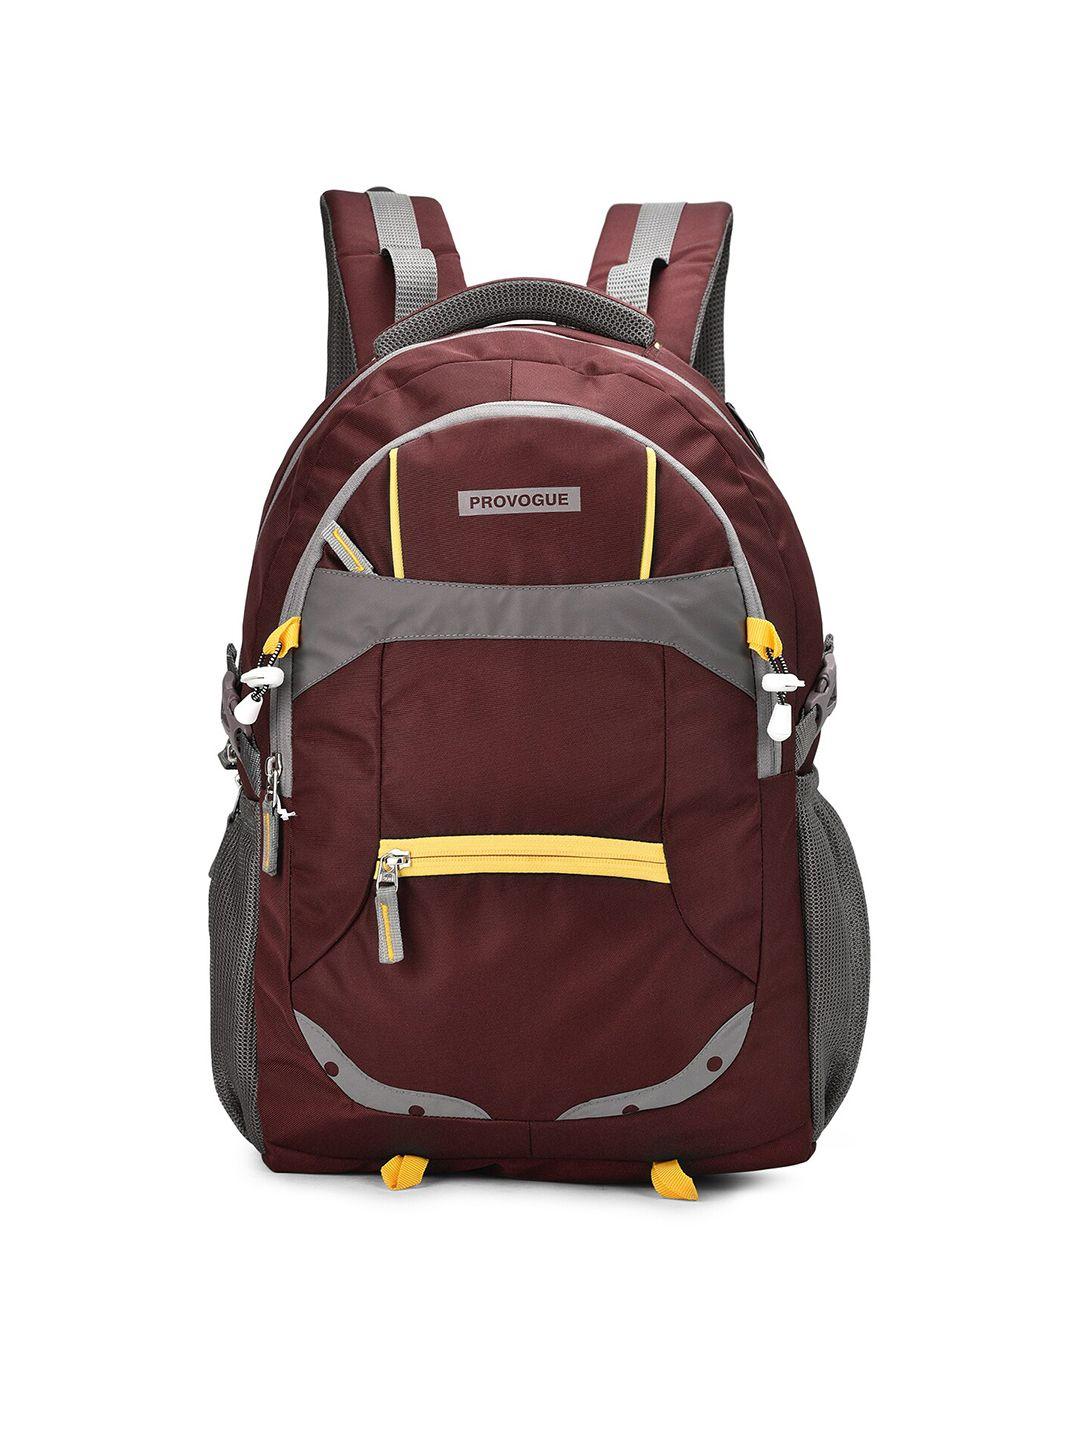 provogue unisex maroon & grey backpack with reflective strip